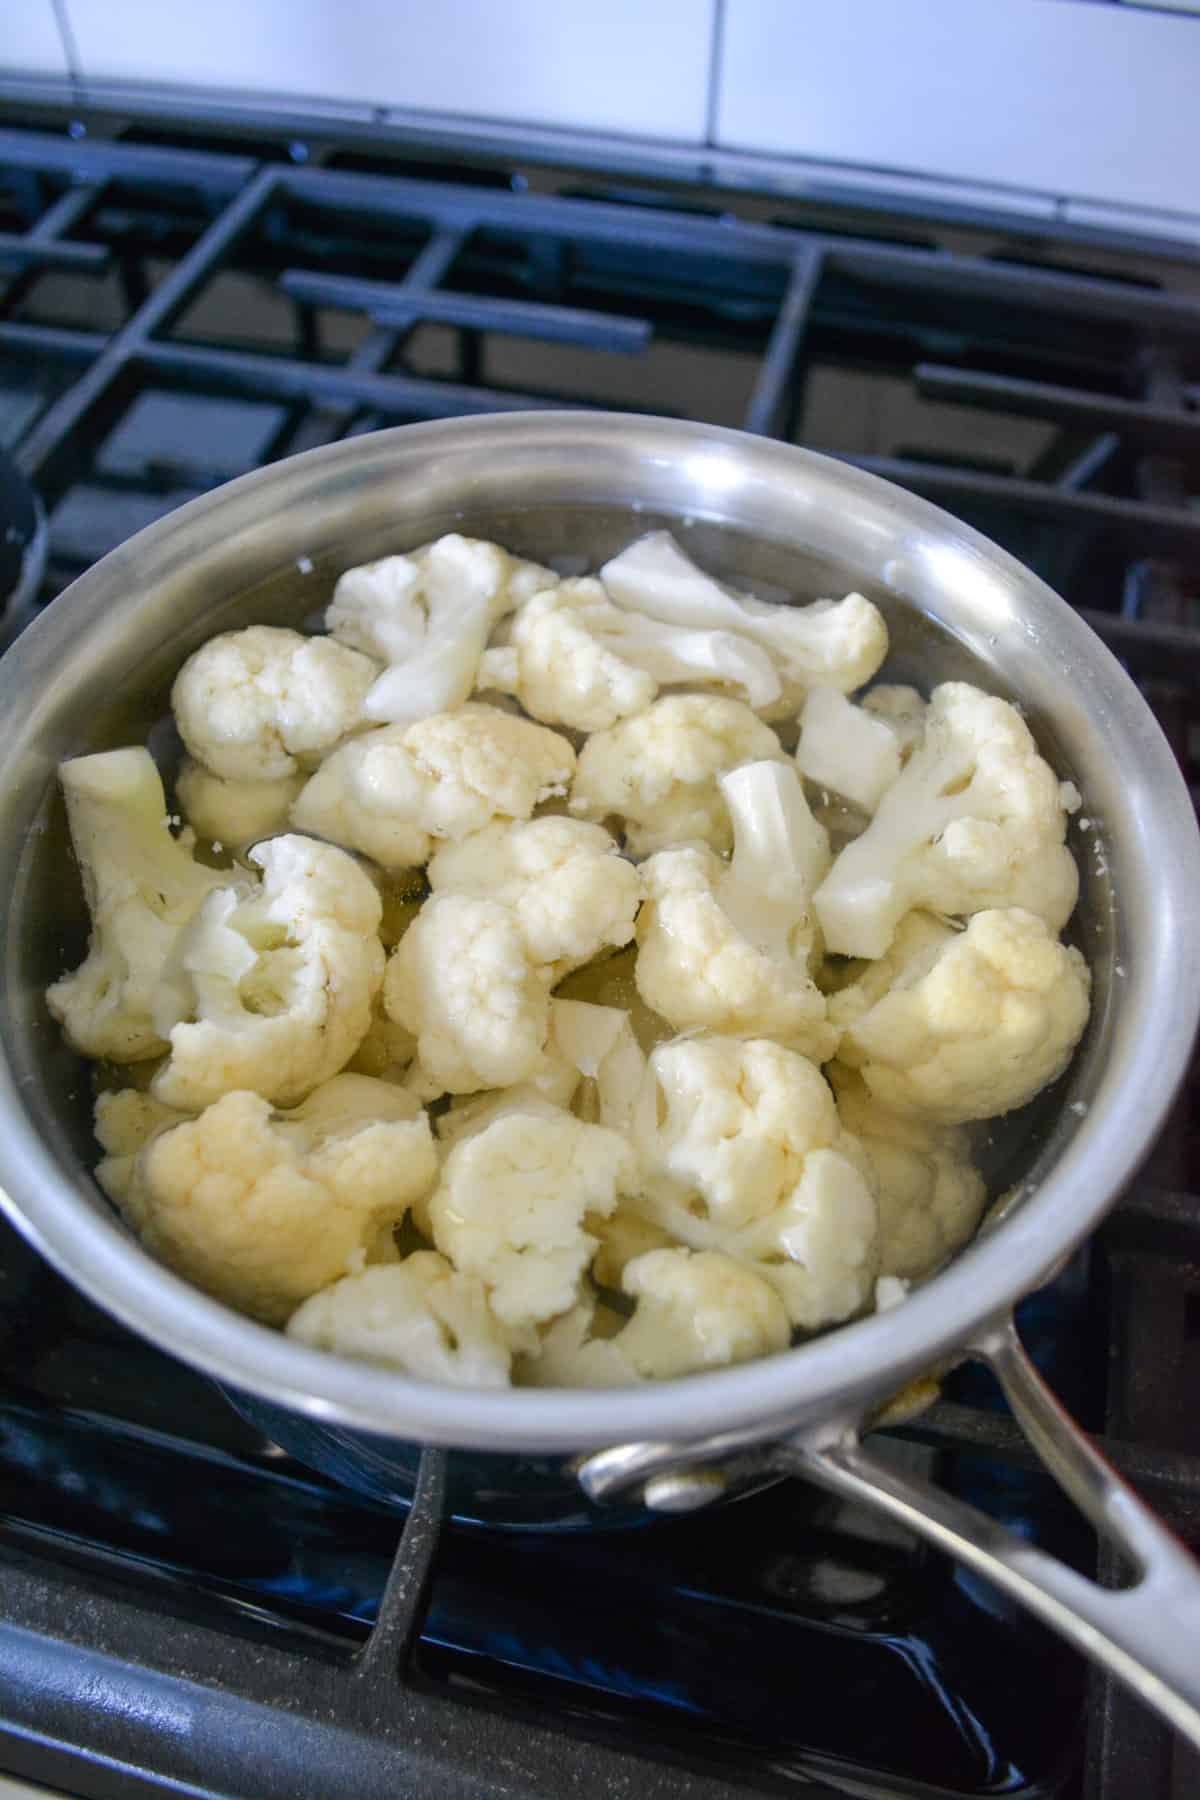 Cauliflower florets in a port of simmering water.